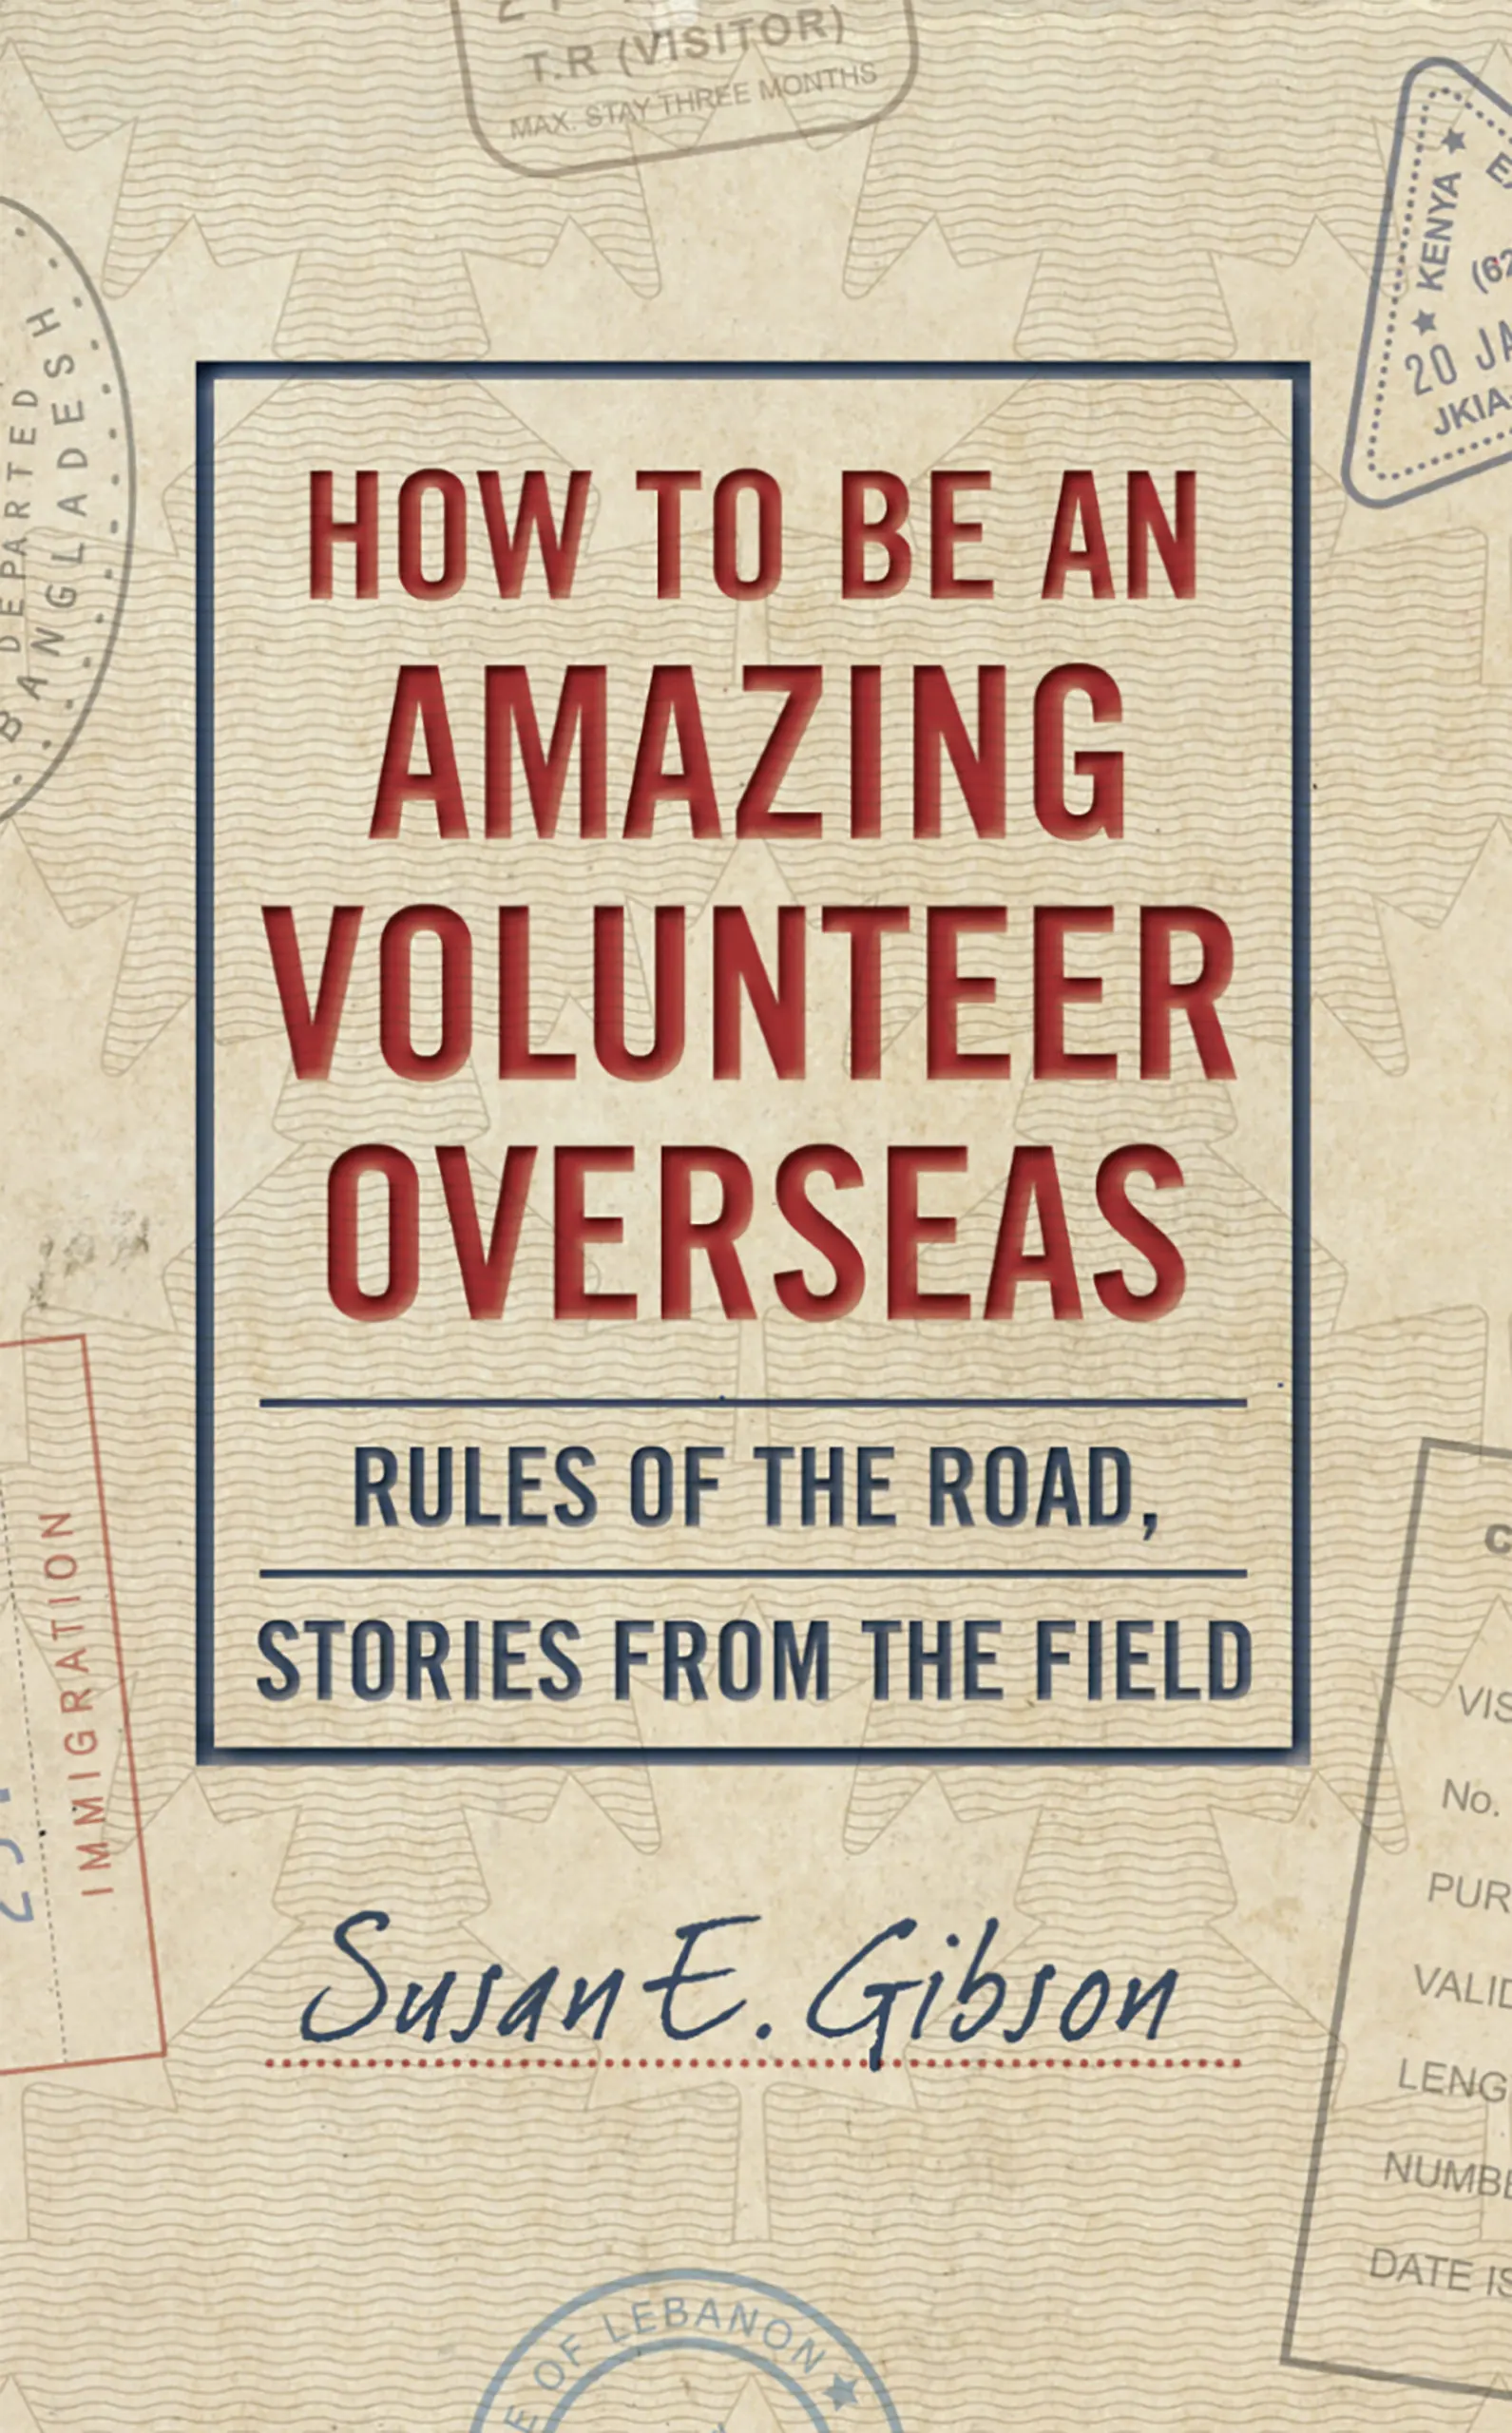 How to Be an Amazing Volunteer Overseas by Susan Gibson book cover